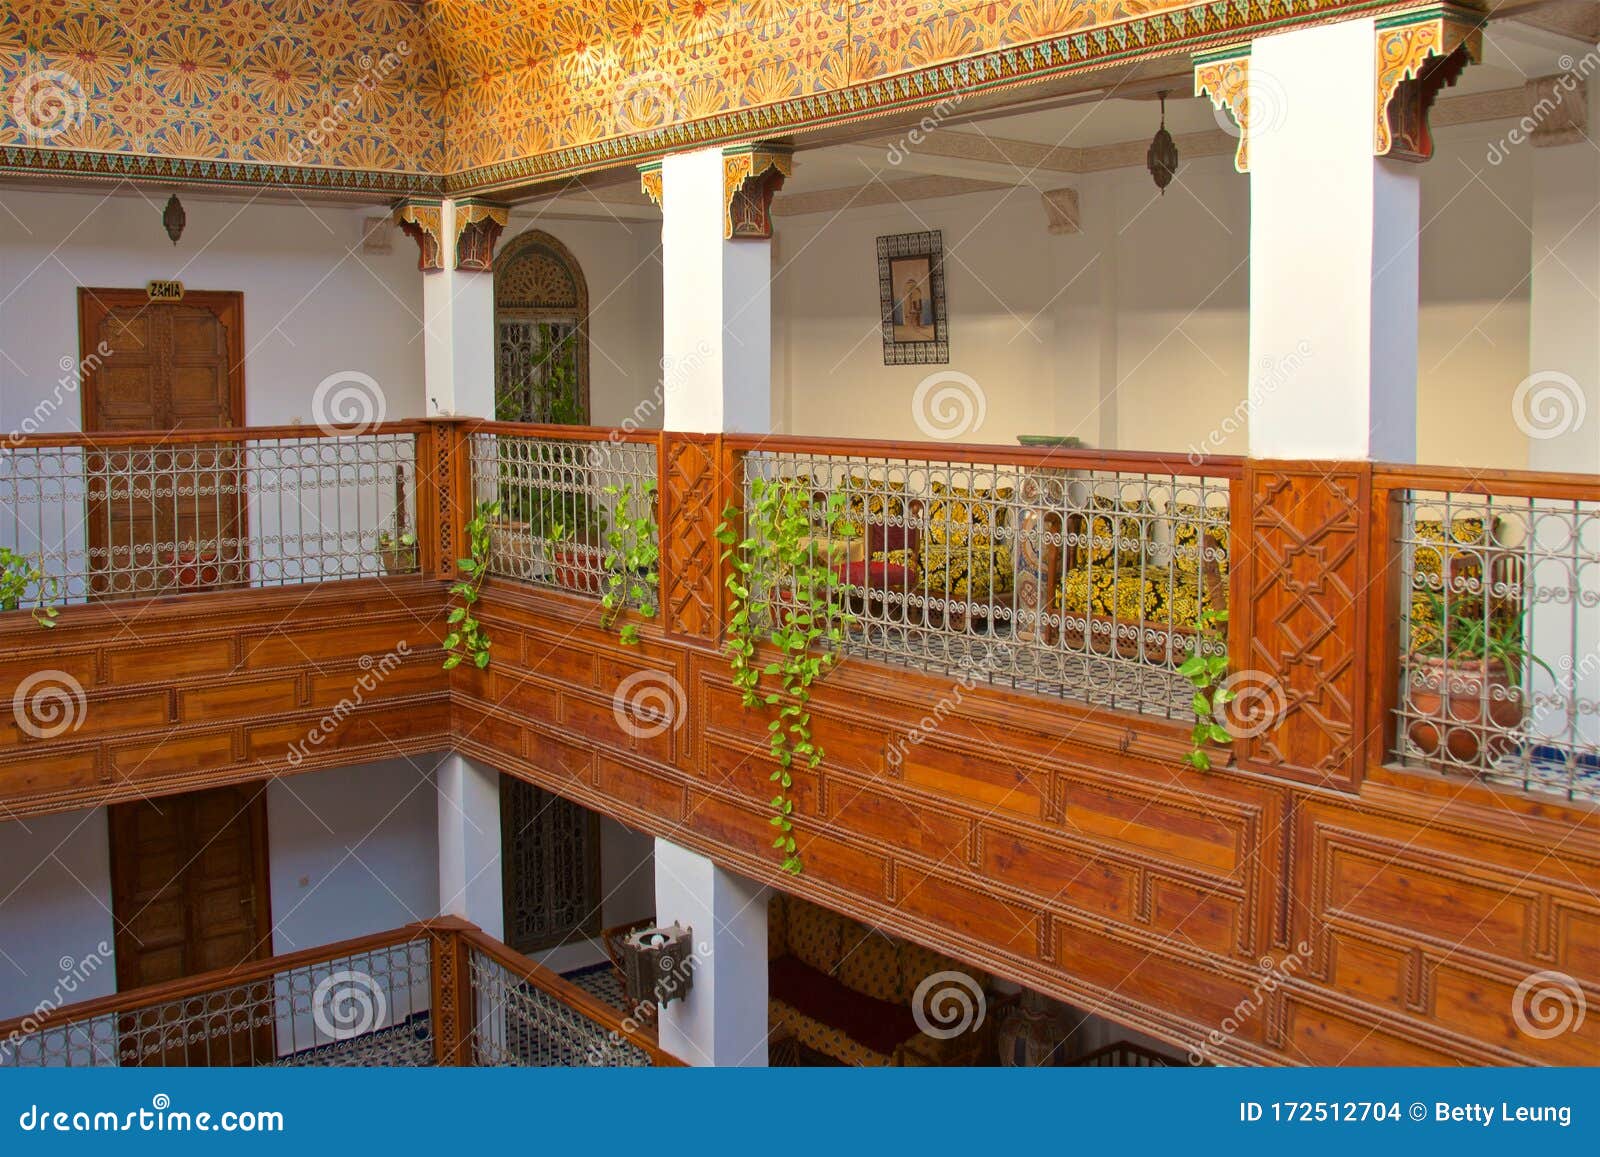 tranquility and quietness in traditional riad in fez medina, morocco